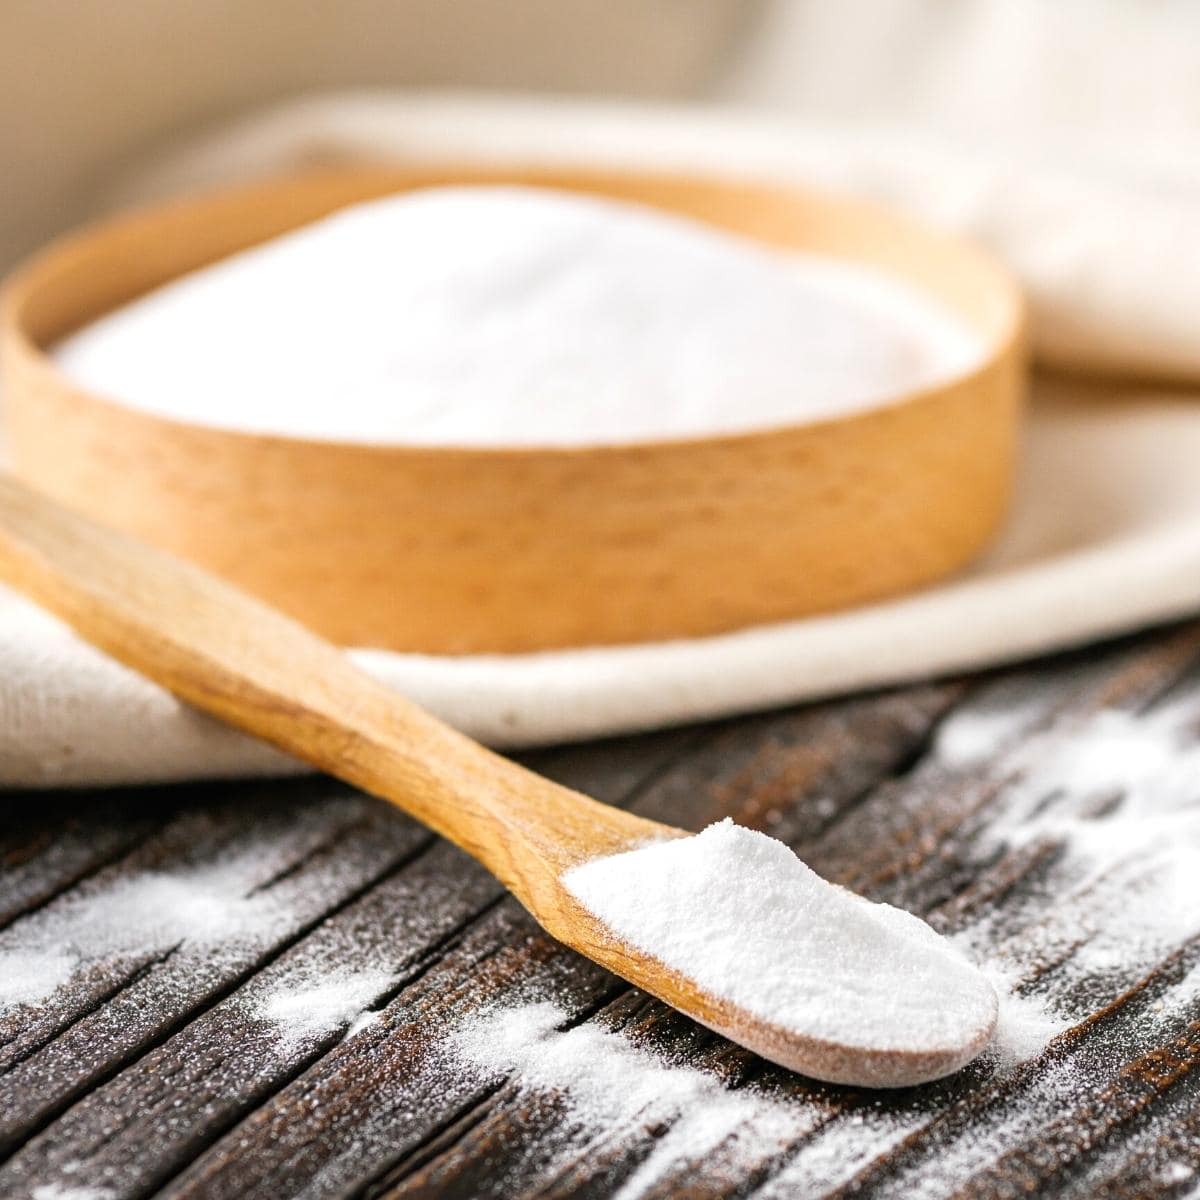 baking powder resting on a wooden spoon.